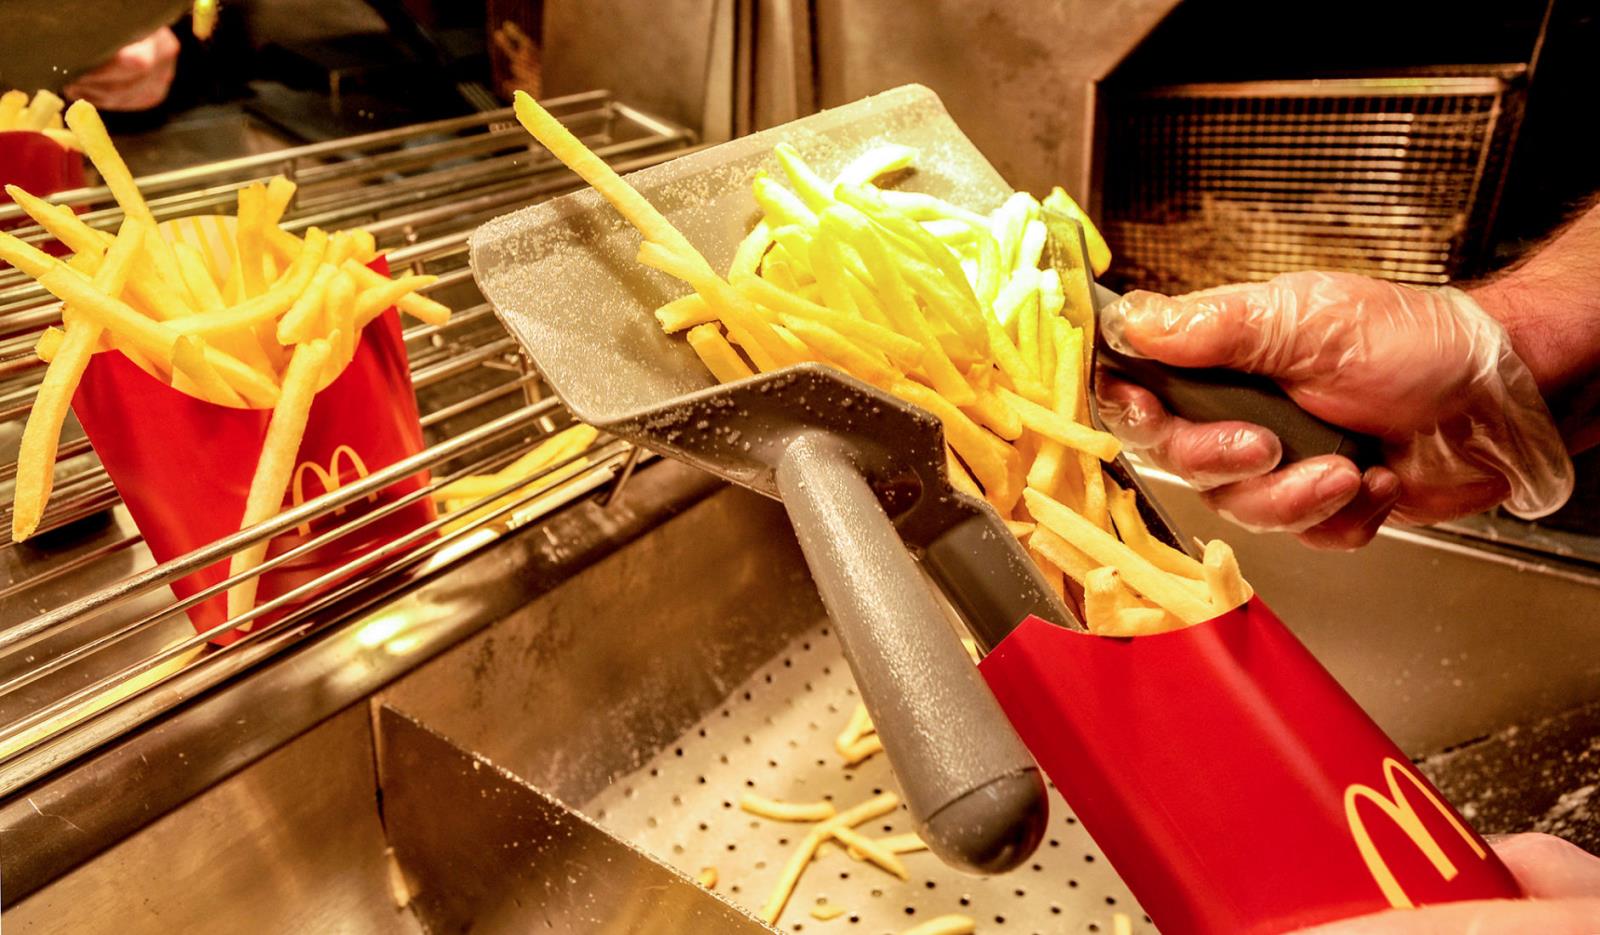 French fries provided by J.R. Simplot Co. are served at a McDonald’s in Pocatello. McDonald’s Corp. spent almost $136 million last year on Idaho agricultural commodities to supply its fast-food restaurants. 